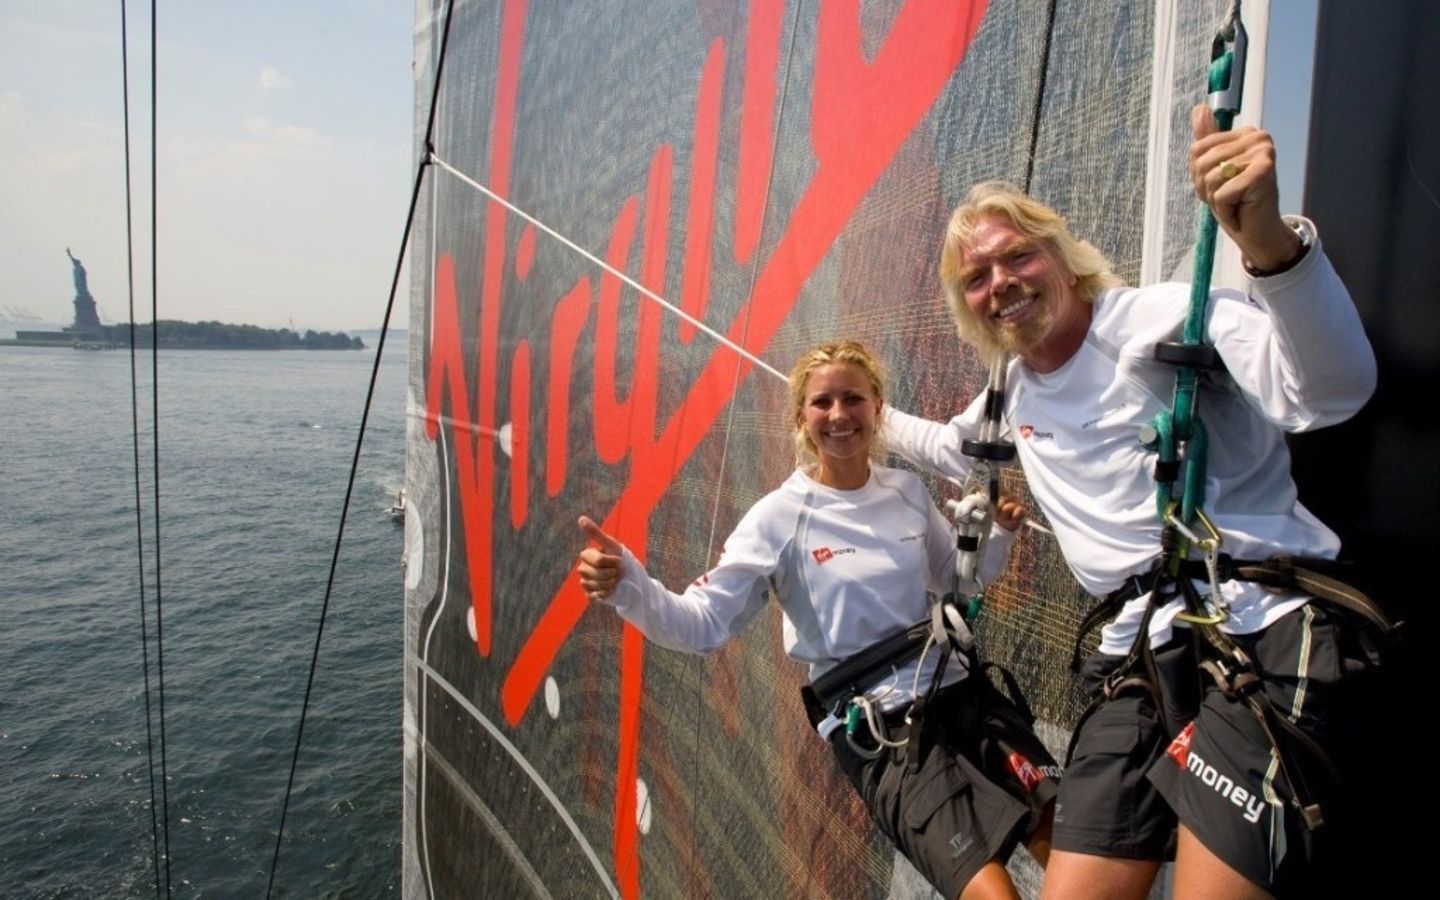 Richard Branson and Holly Branson on a boat during an attempt to break the world record for the fastest transatlantic crossing in a 99ft monoull sailboat